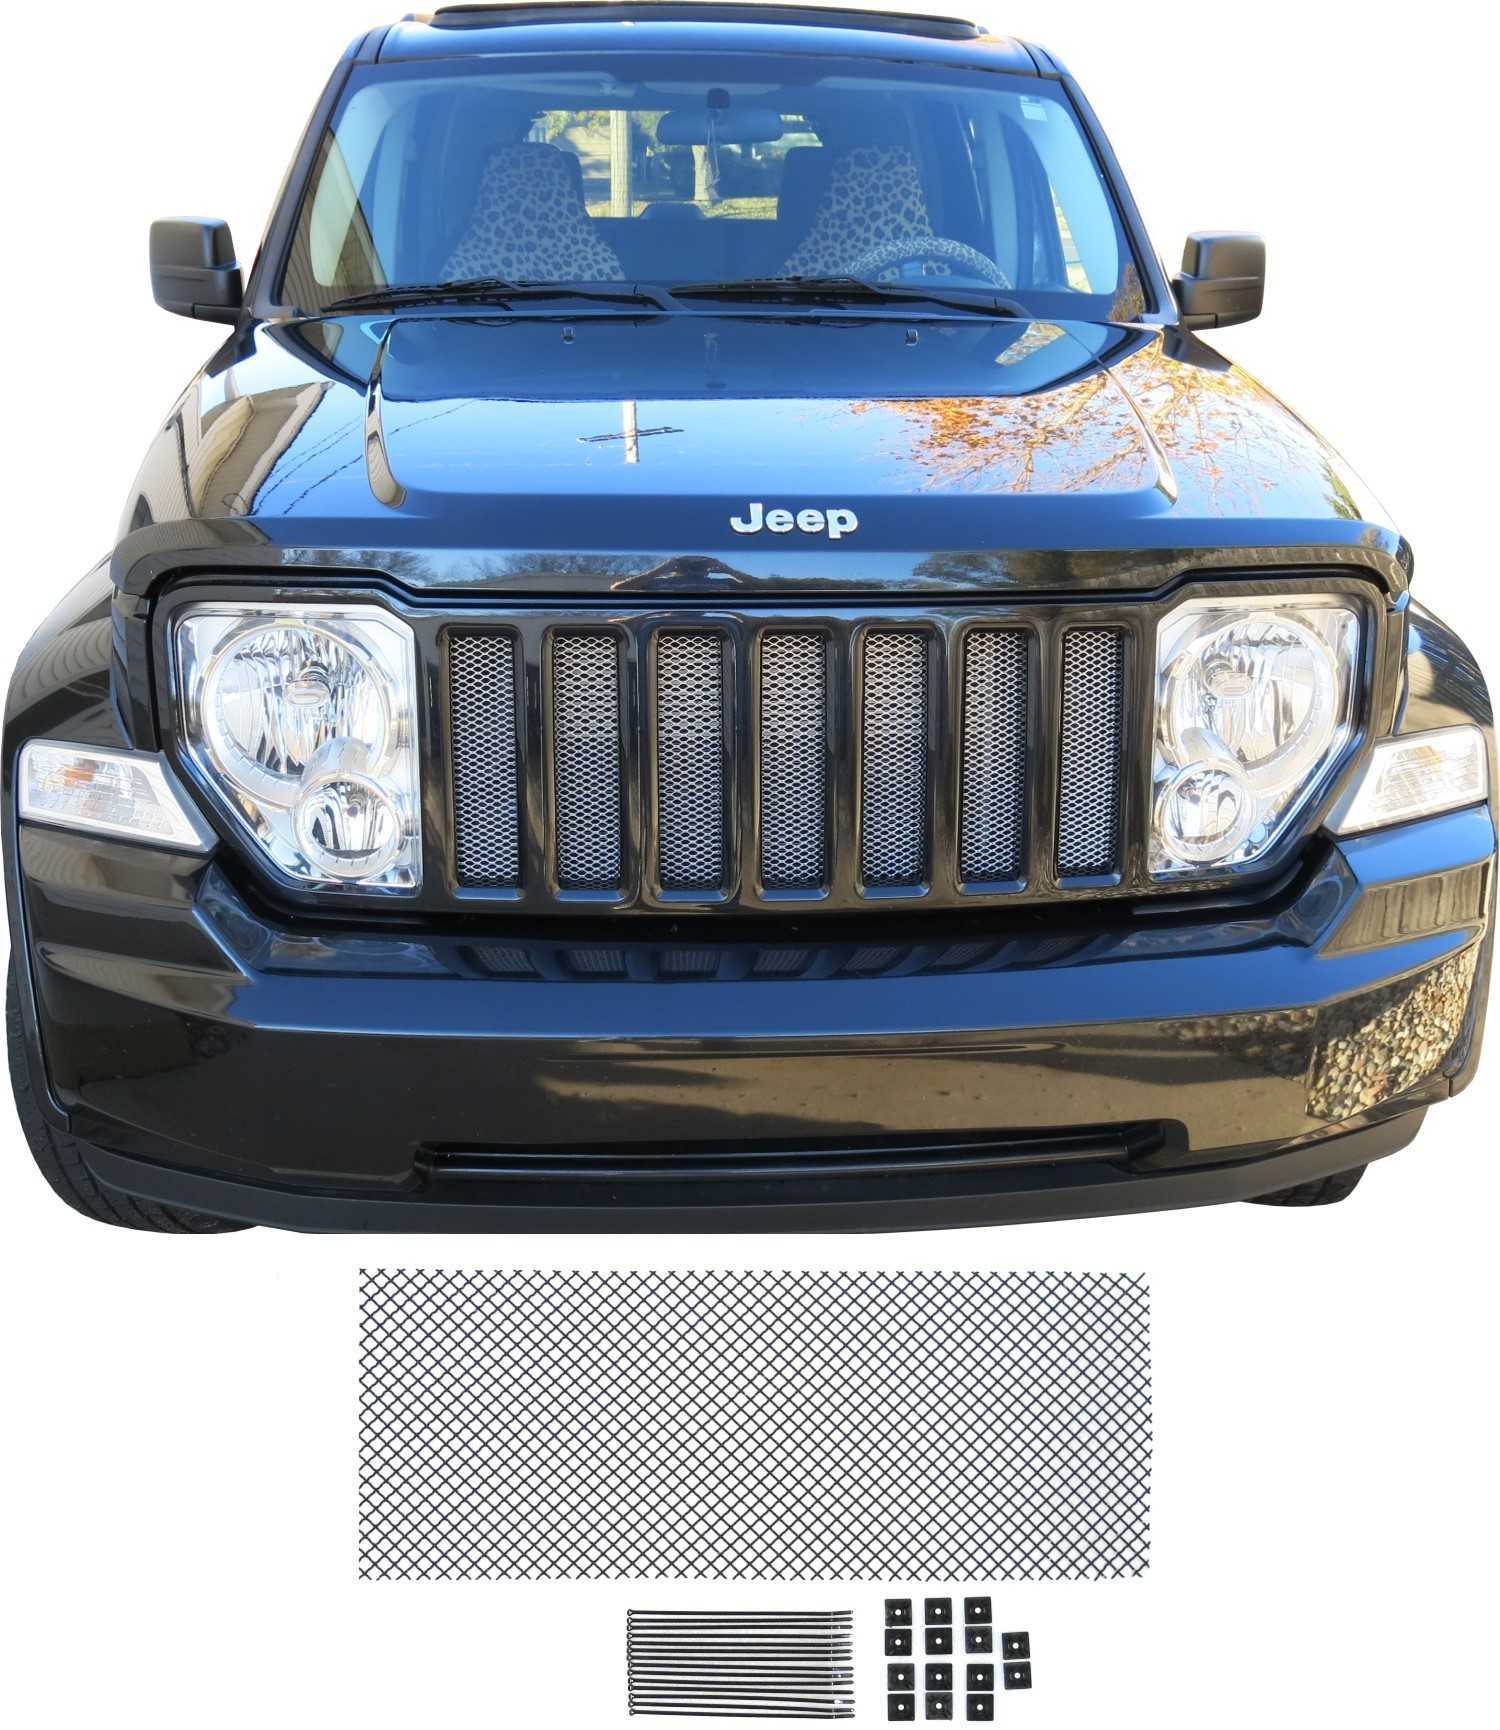 Mesh Grill Kit For 2008 - 2012 Jeep Liberty